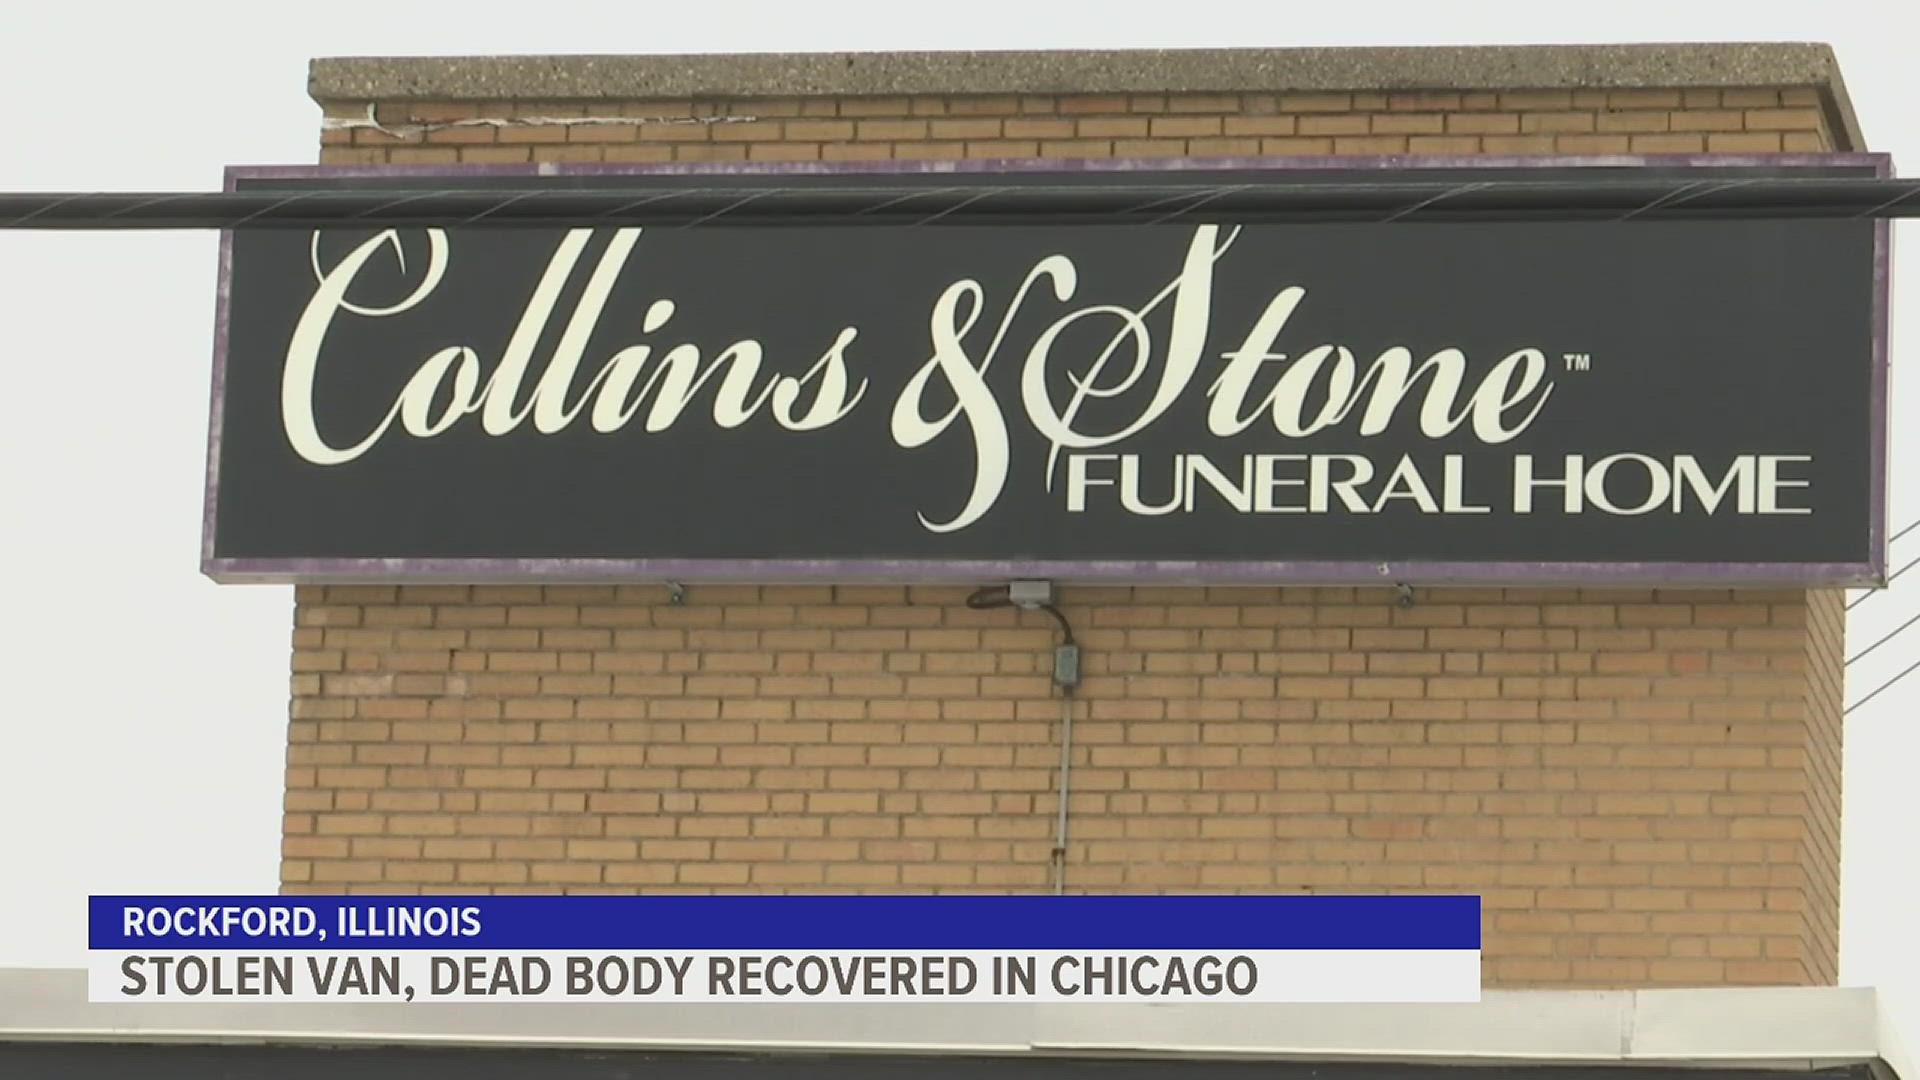 Rockford Police tweeted Monday evening that the body previously missing from a stolen funeral home van has been found.